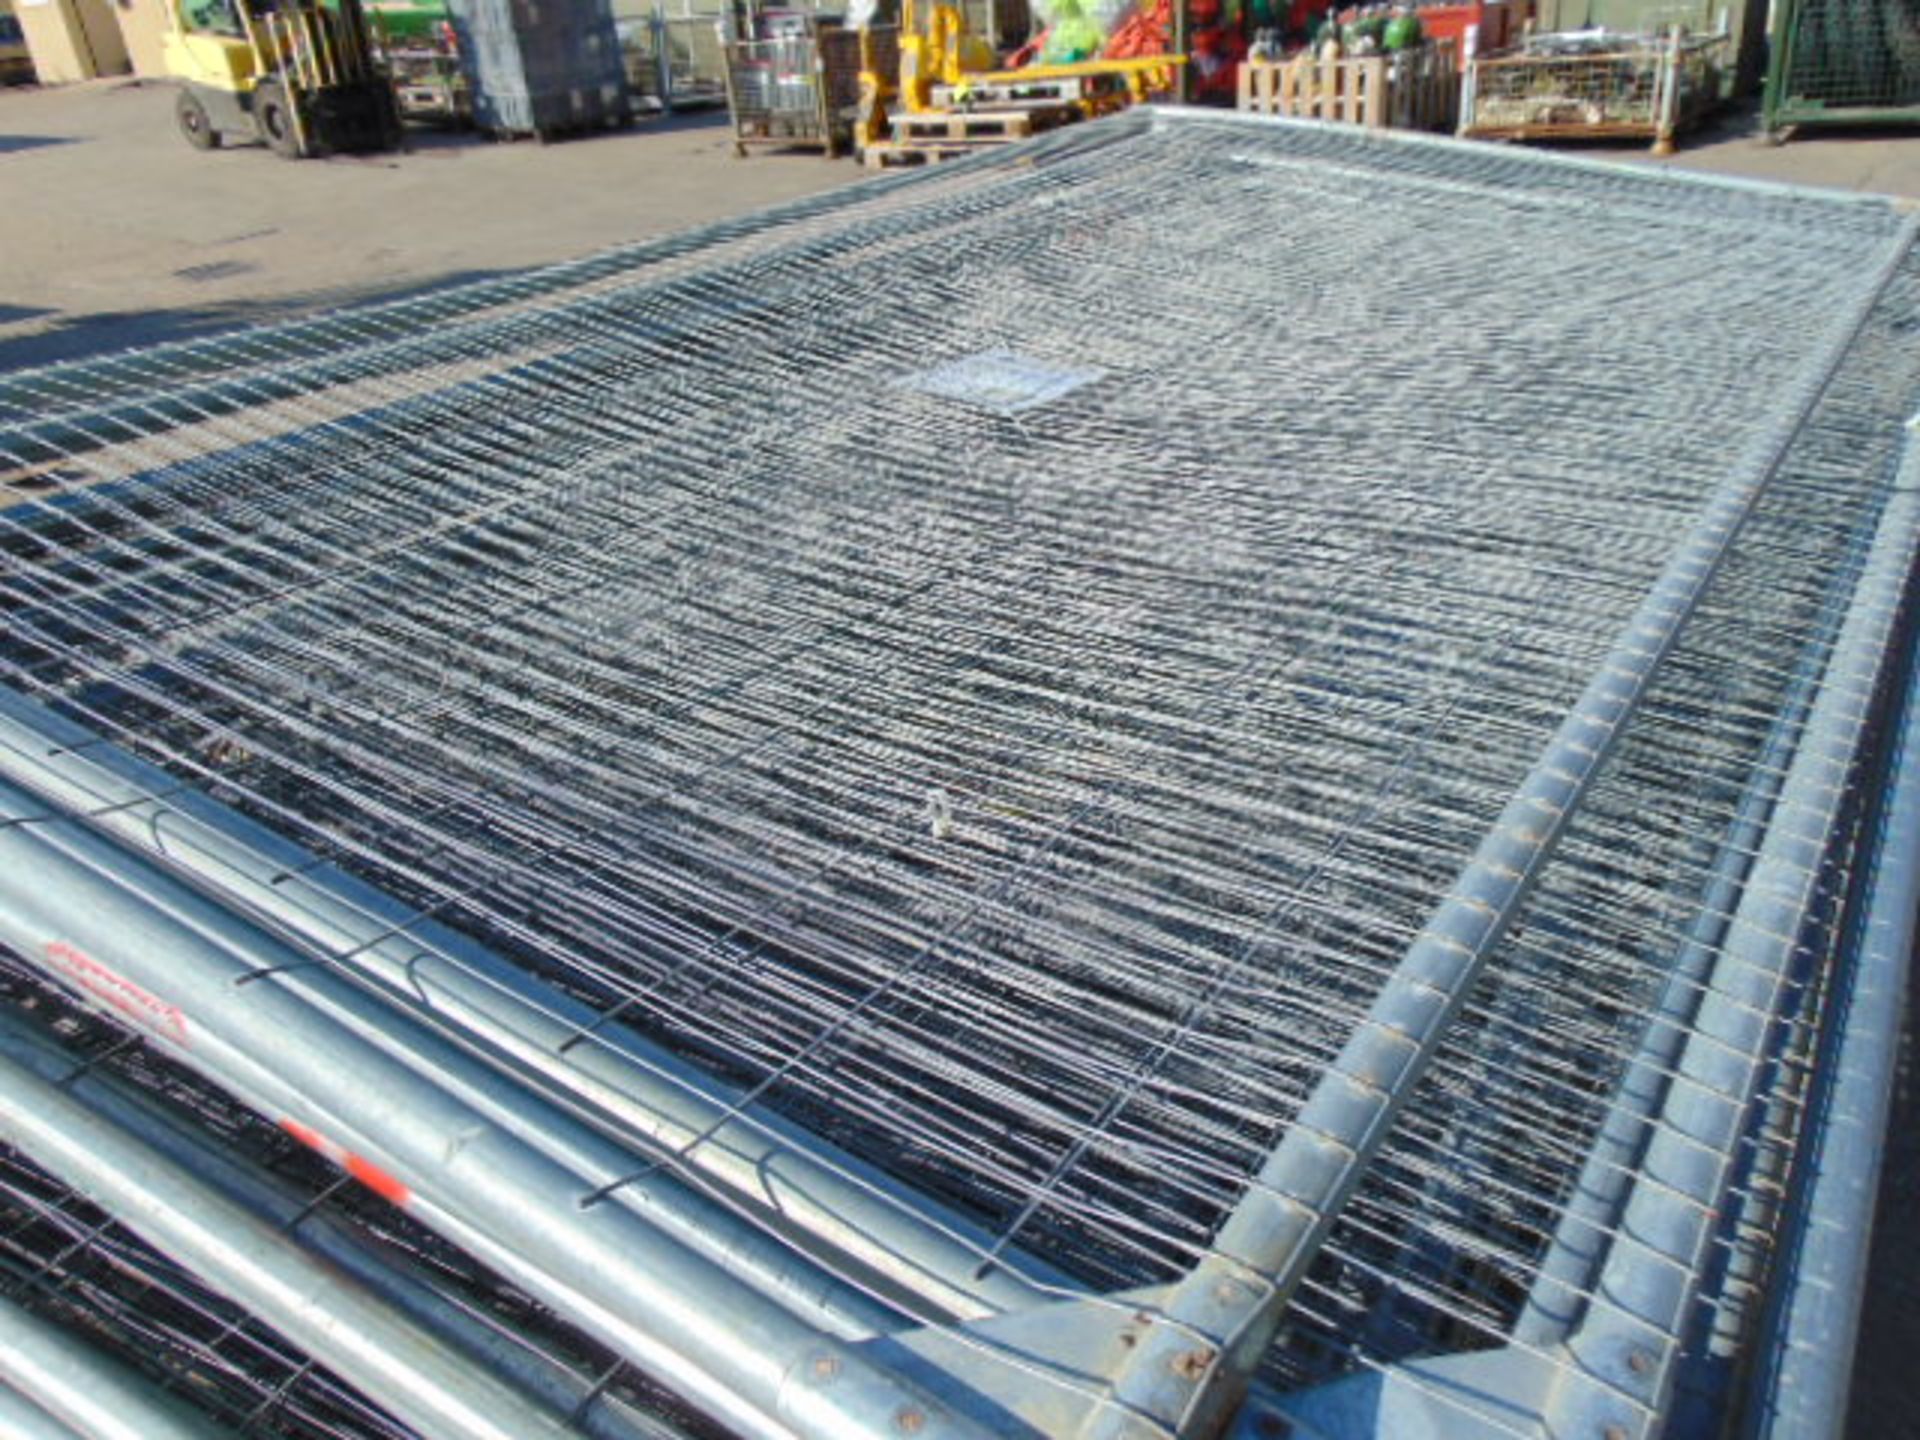 30 x Heras Style Galvanised Fencing Panels 3.5m x 2m - Image 3 of 3